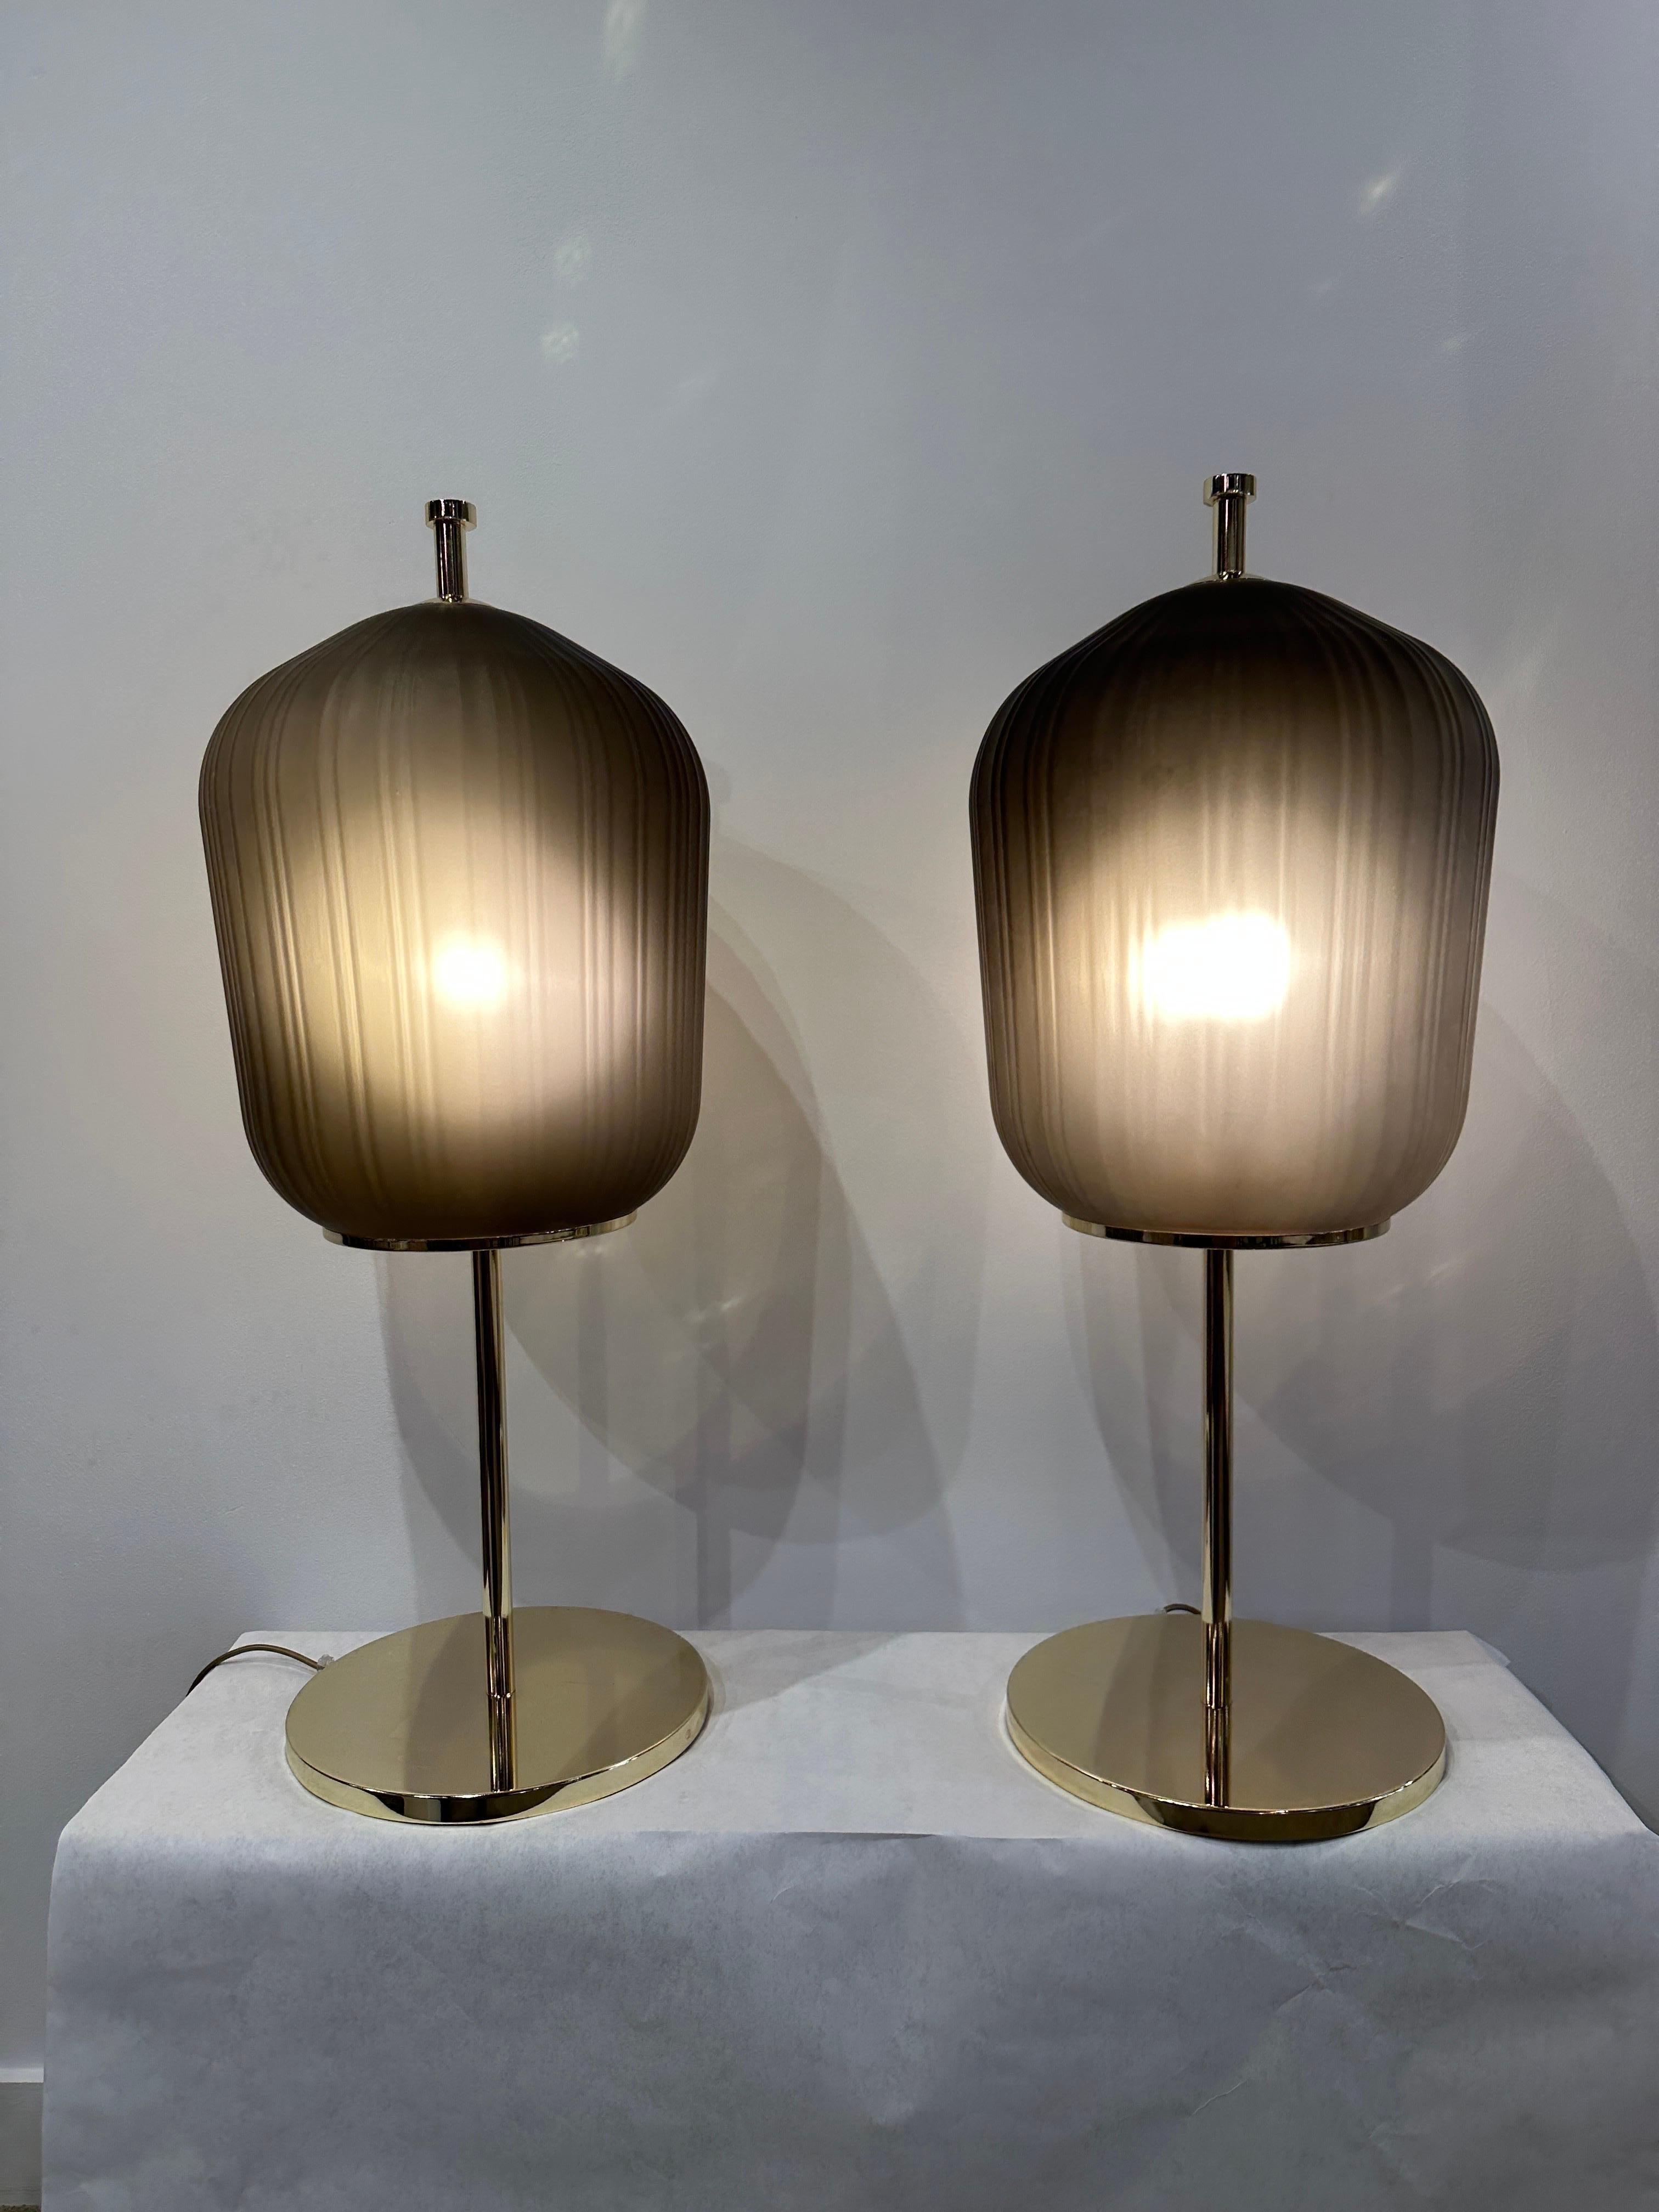 Oversized Murano Glass Lantern Table Lamps, Pair For Sale 5